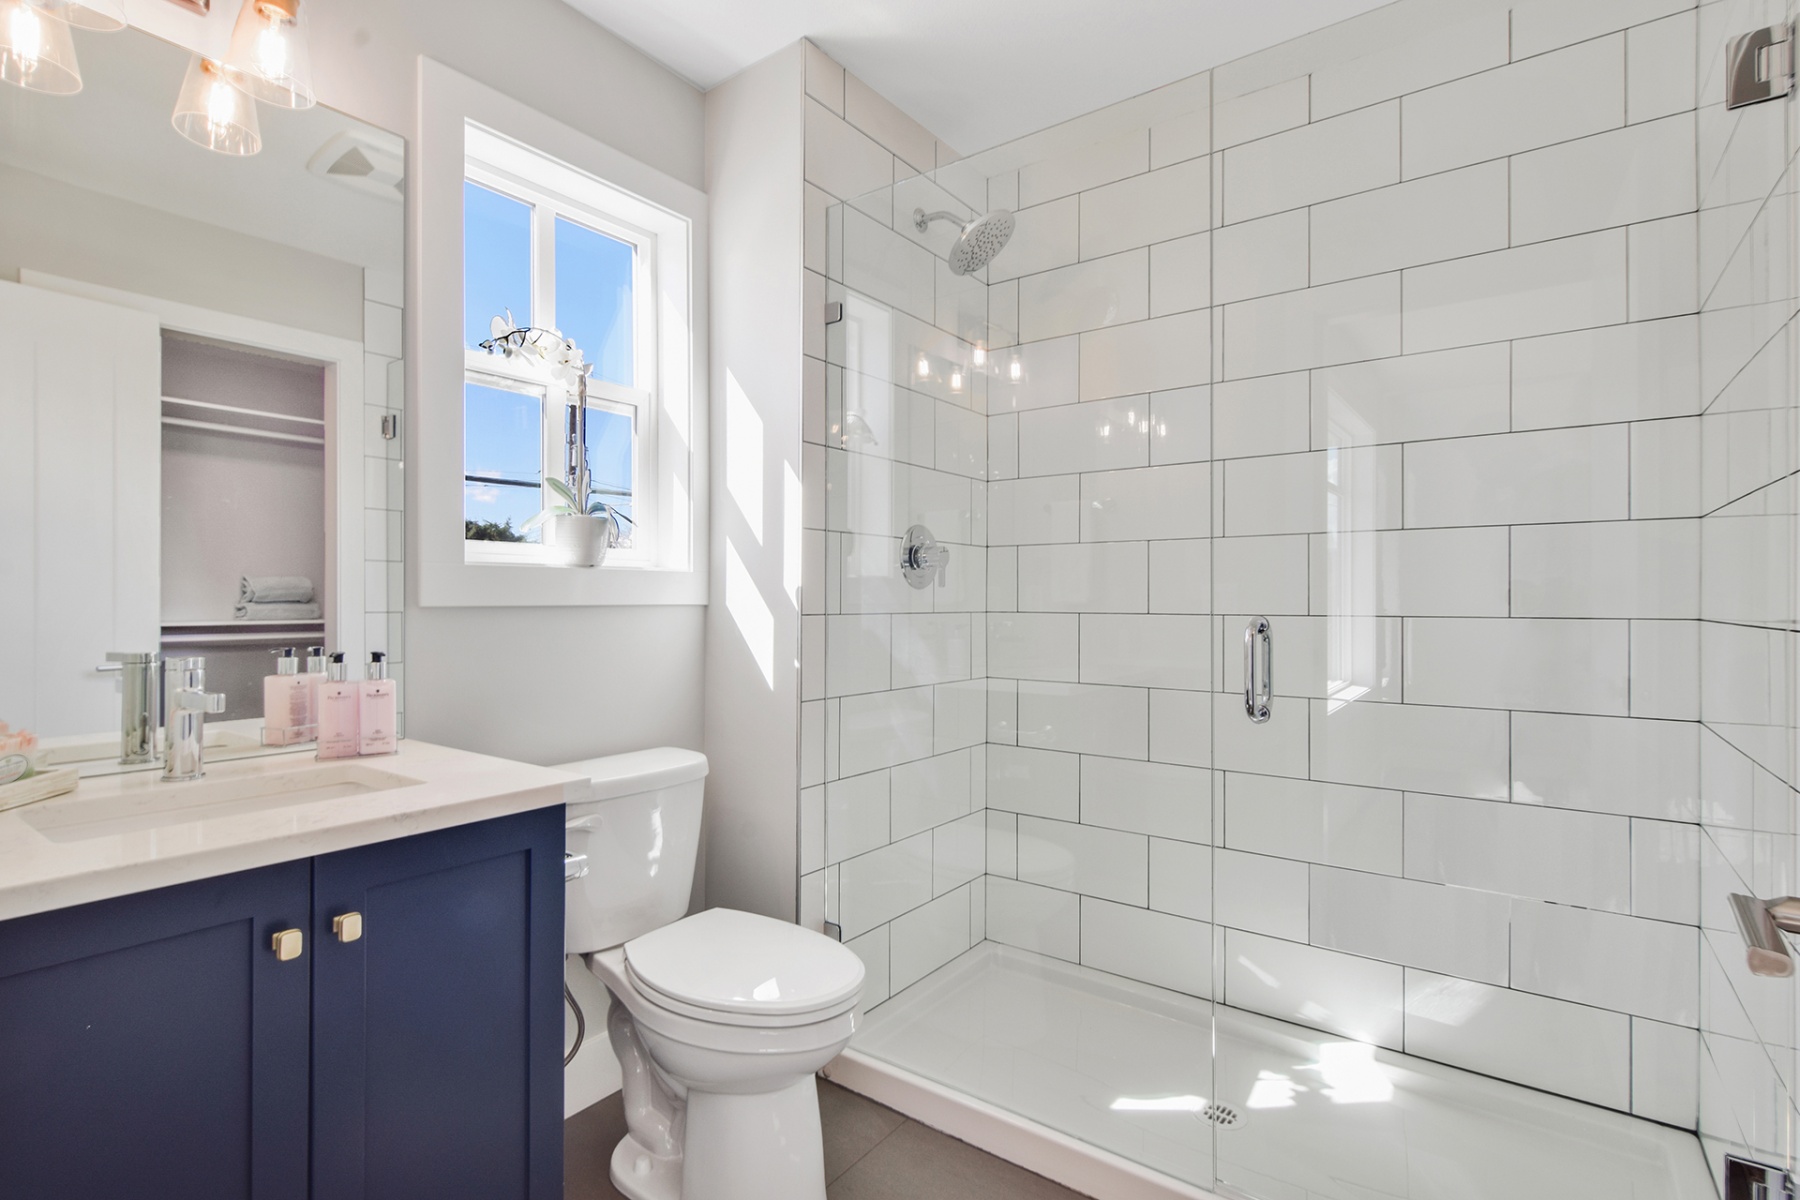 1_harmony_homes_glenwood_infill_project_shower_area_gallery_image_18